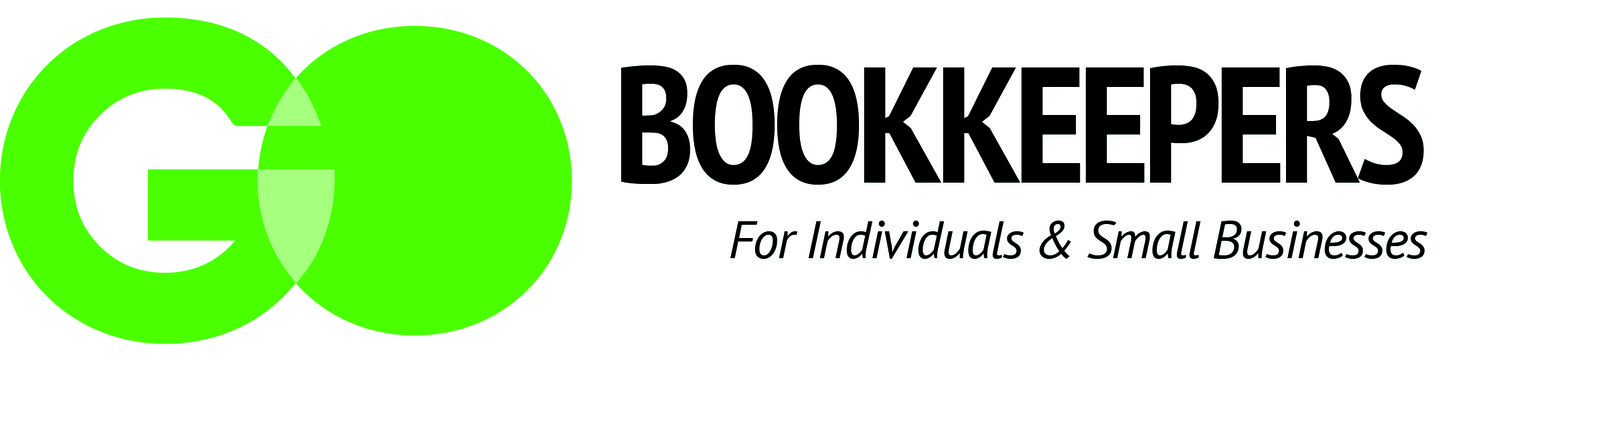 Go Bookkeepers